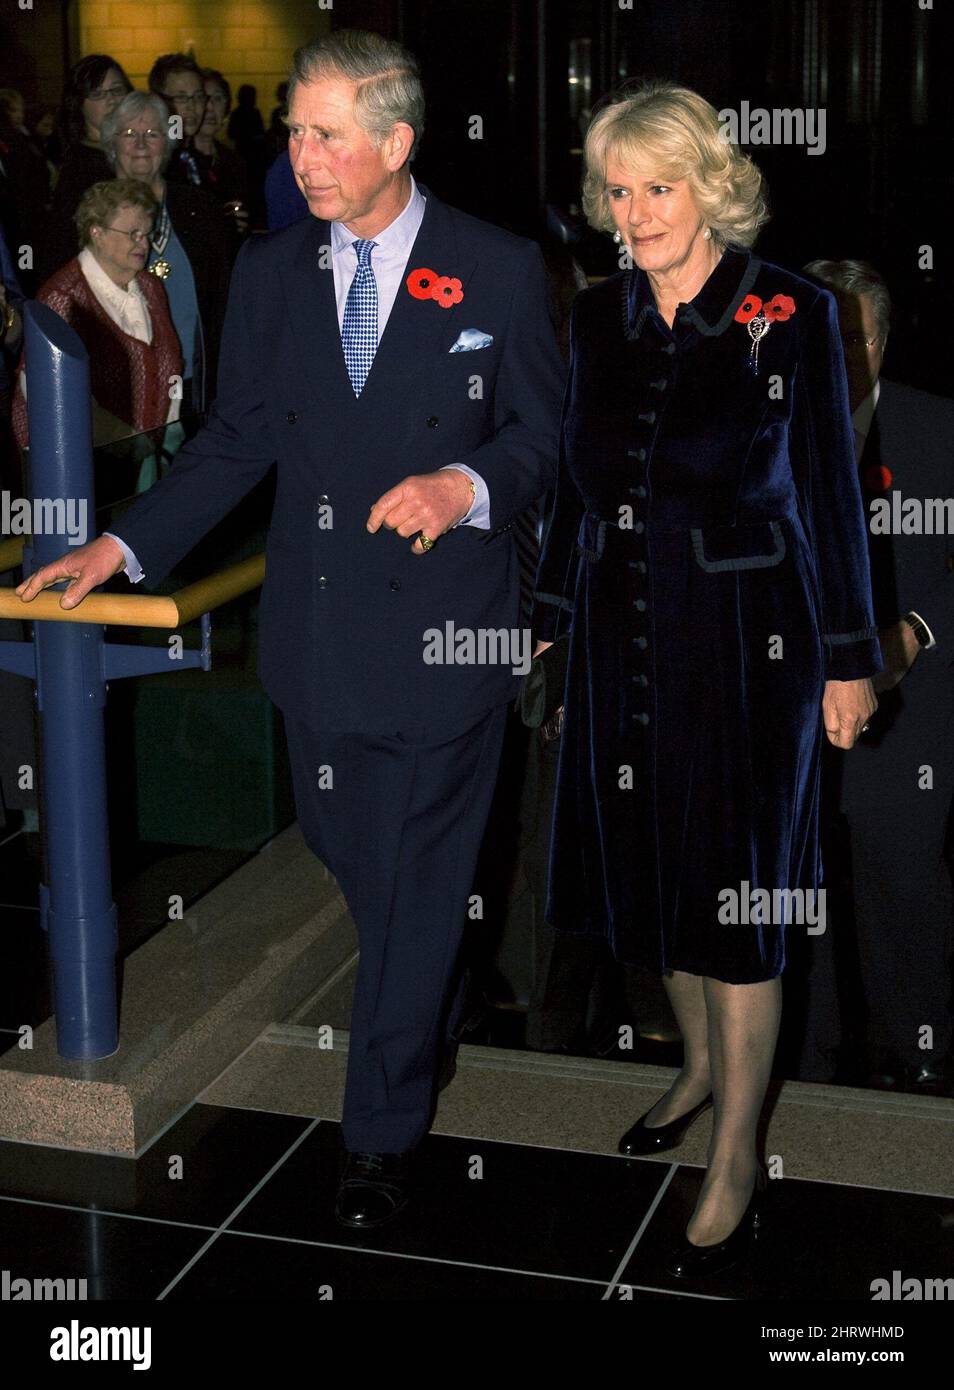 Prince Charles and his wife Camilla, the Duchess of Cornwall, arrive at ...